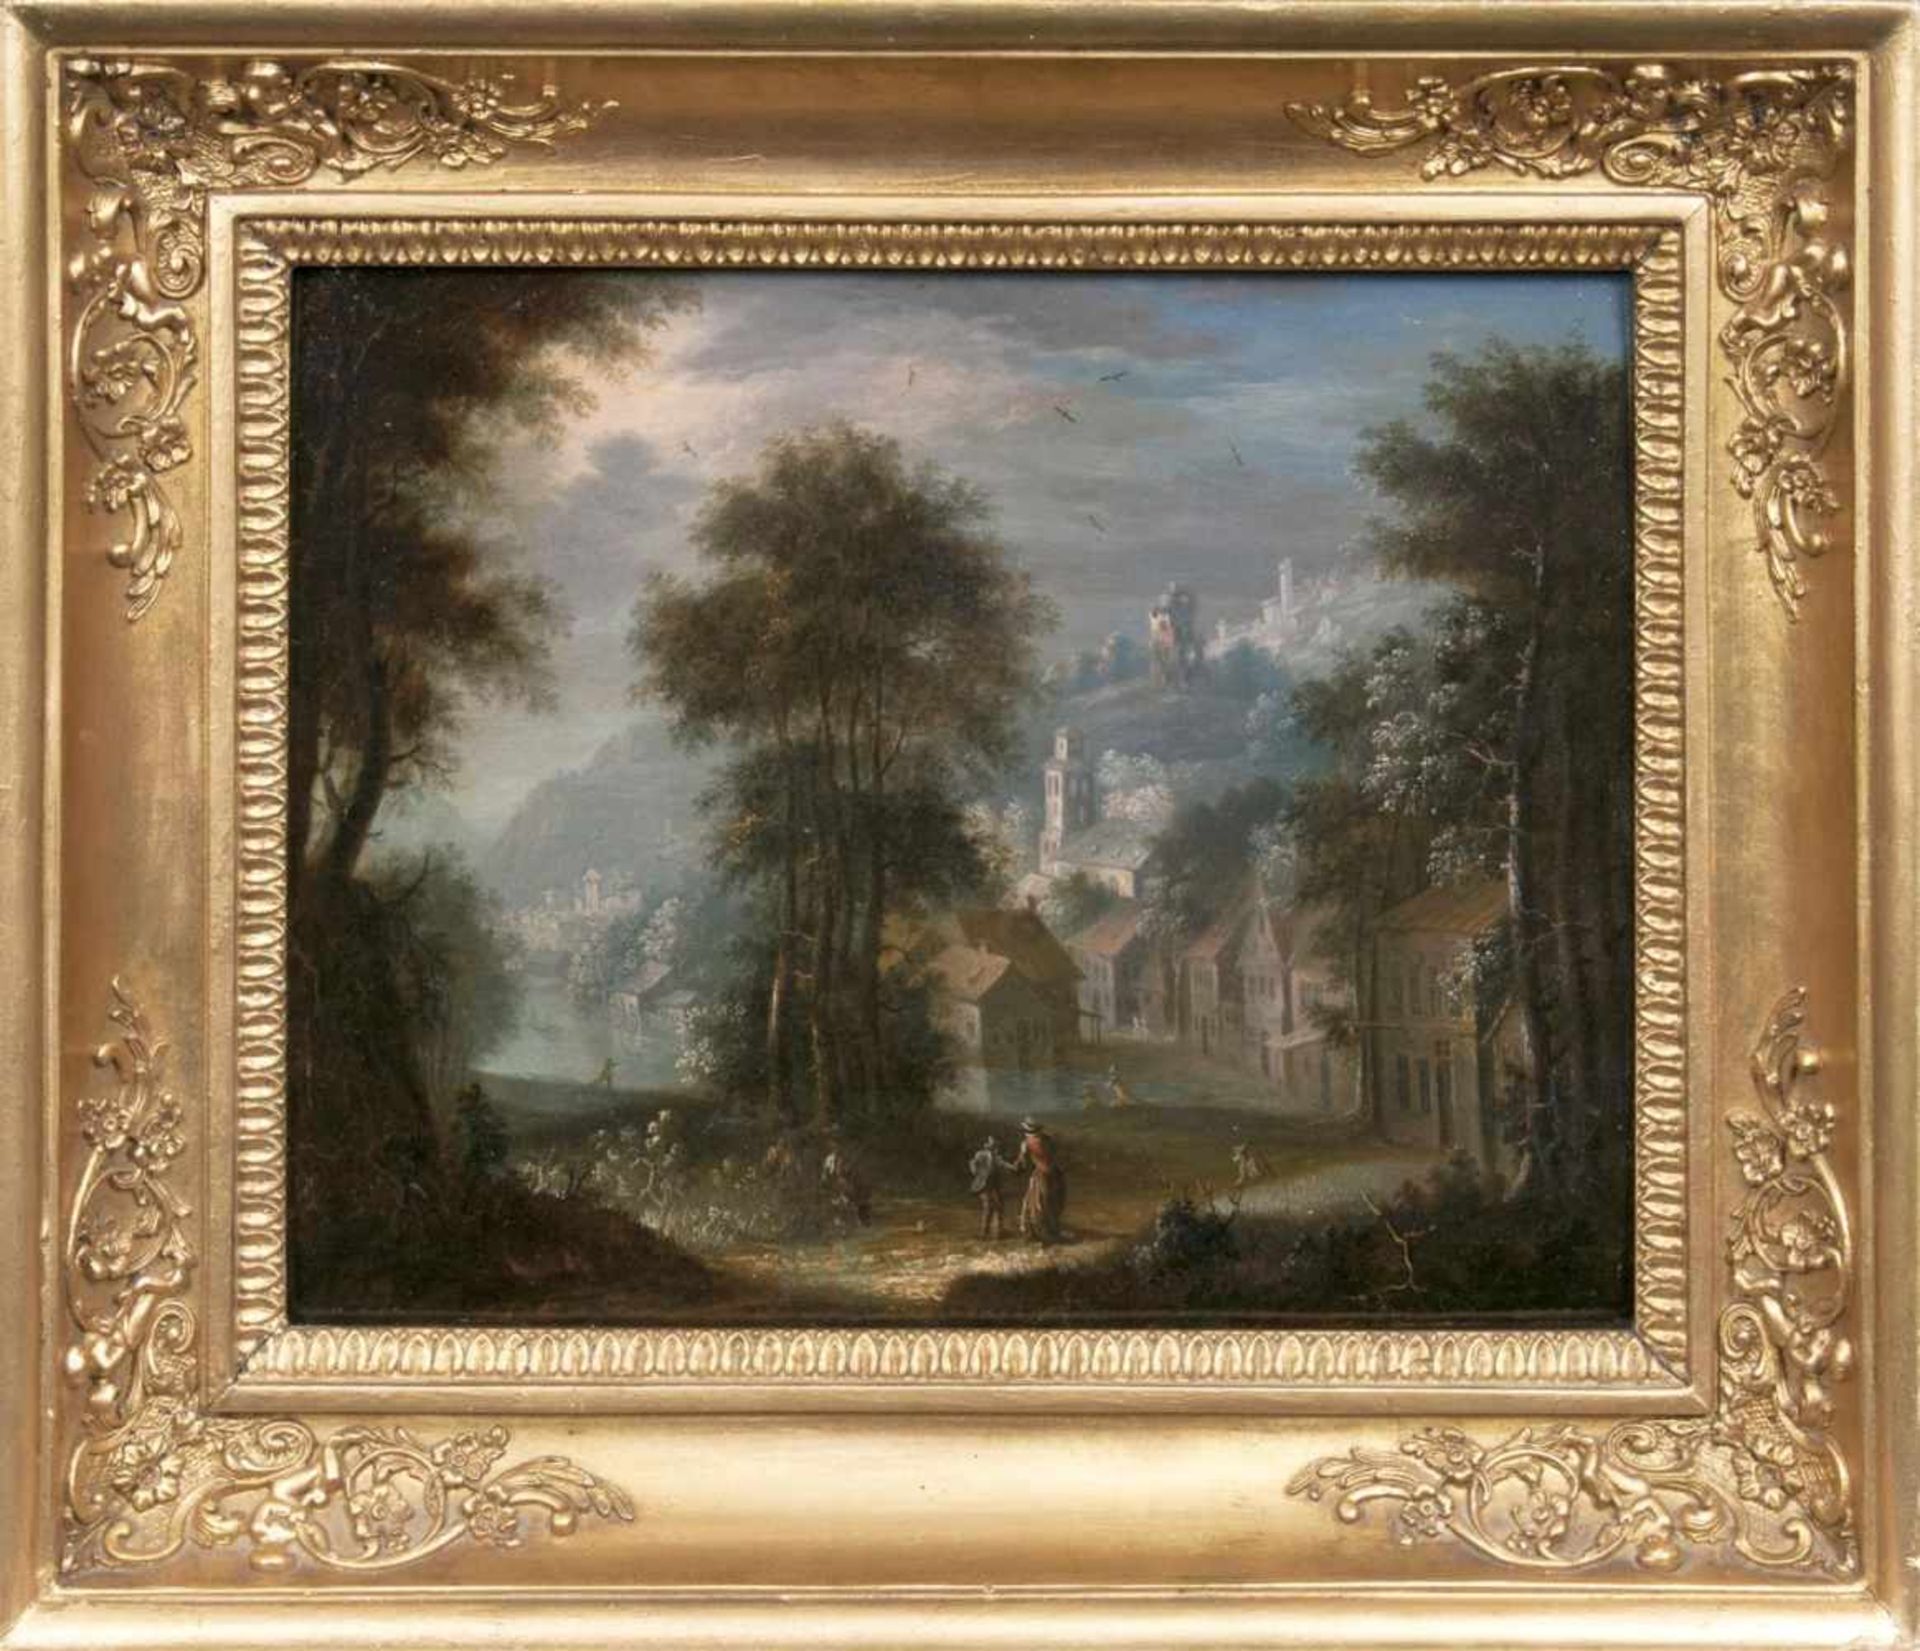 Flemish school17th cent.View of a Town in a River Valleyc. 1650, oil/wood, 27 x 35 cm, on the - Bild 2 aus 2